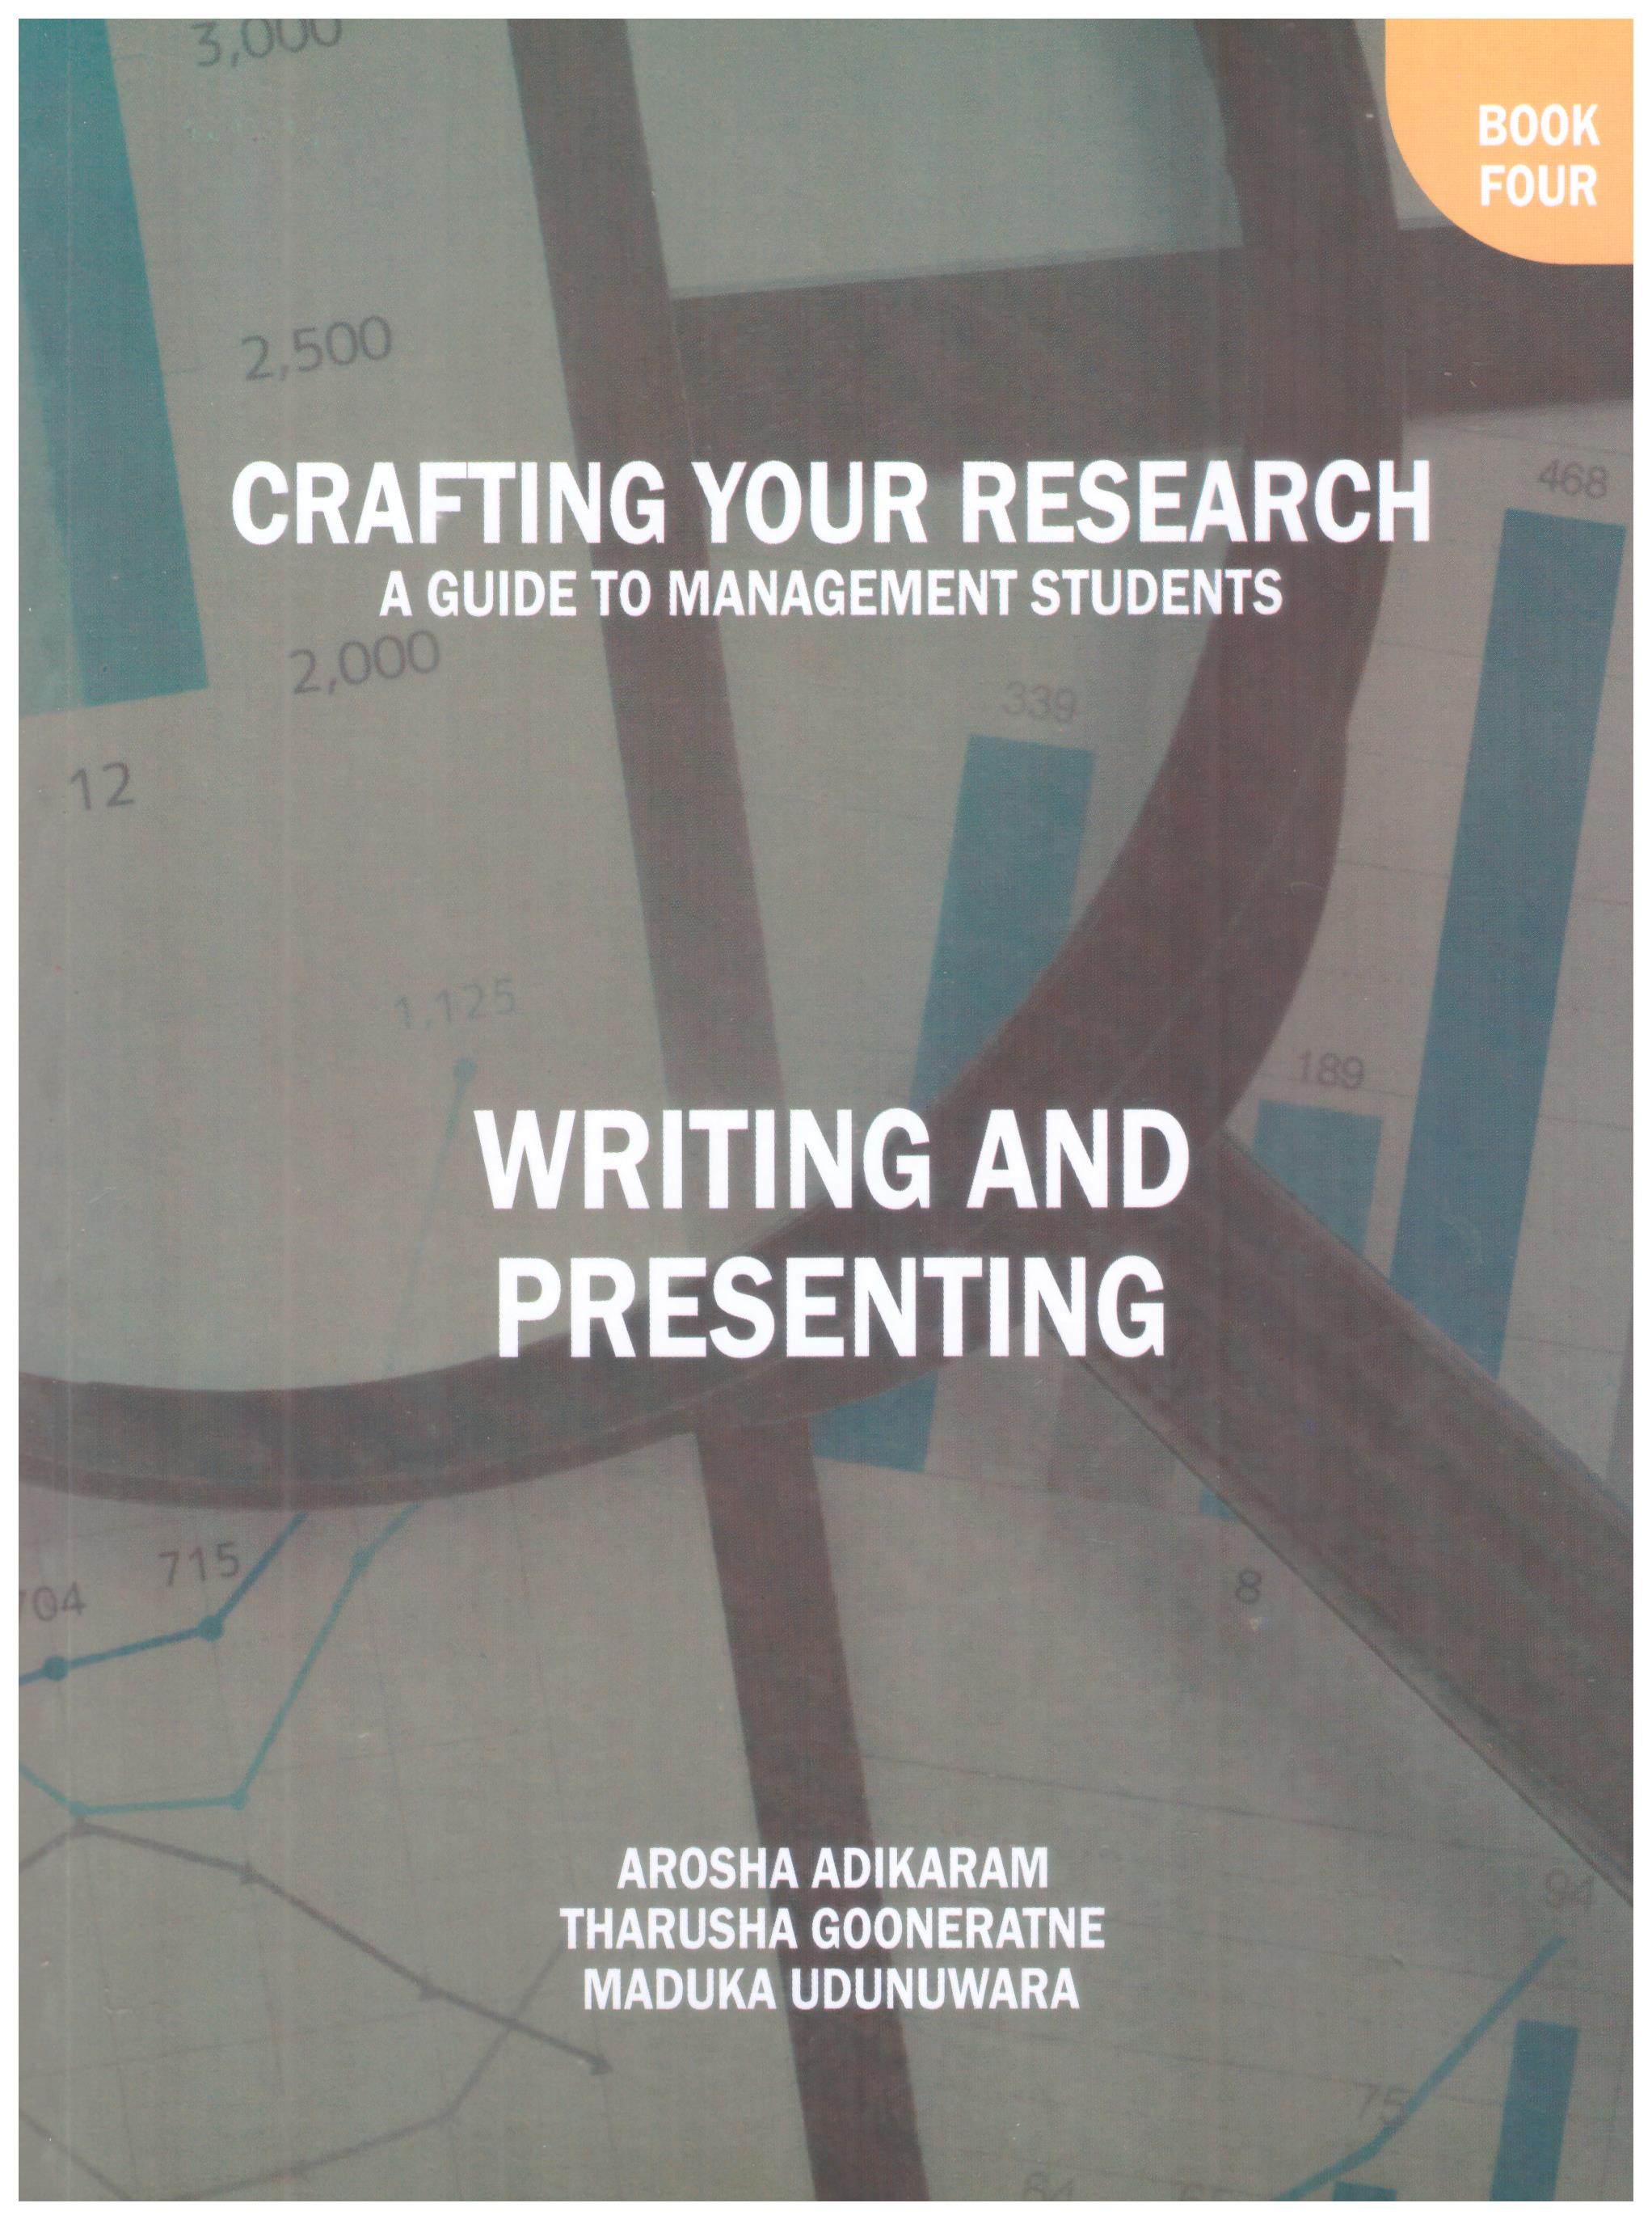 Crafting Your Research : A Guide to Management Students : Writing And Presenting Book Four